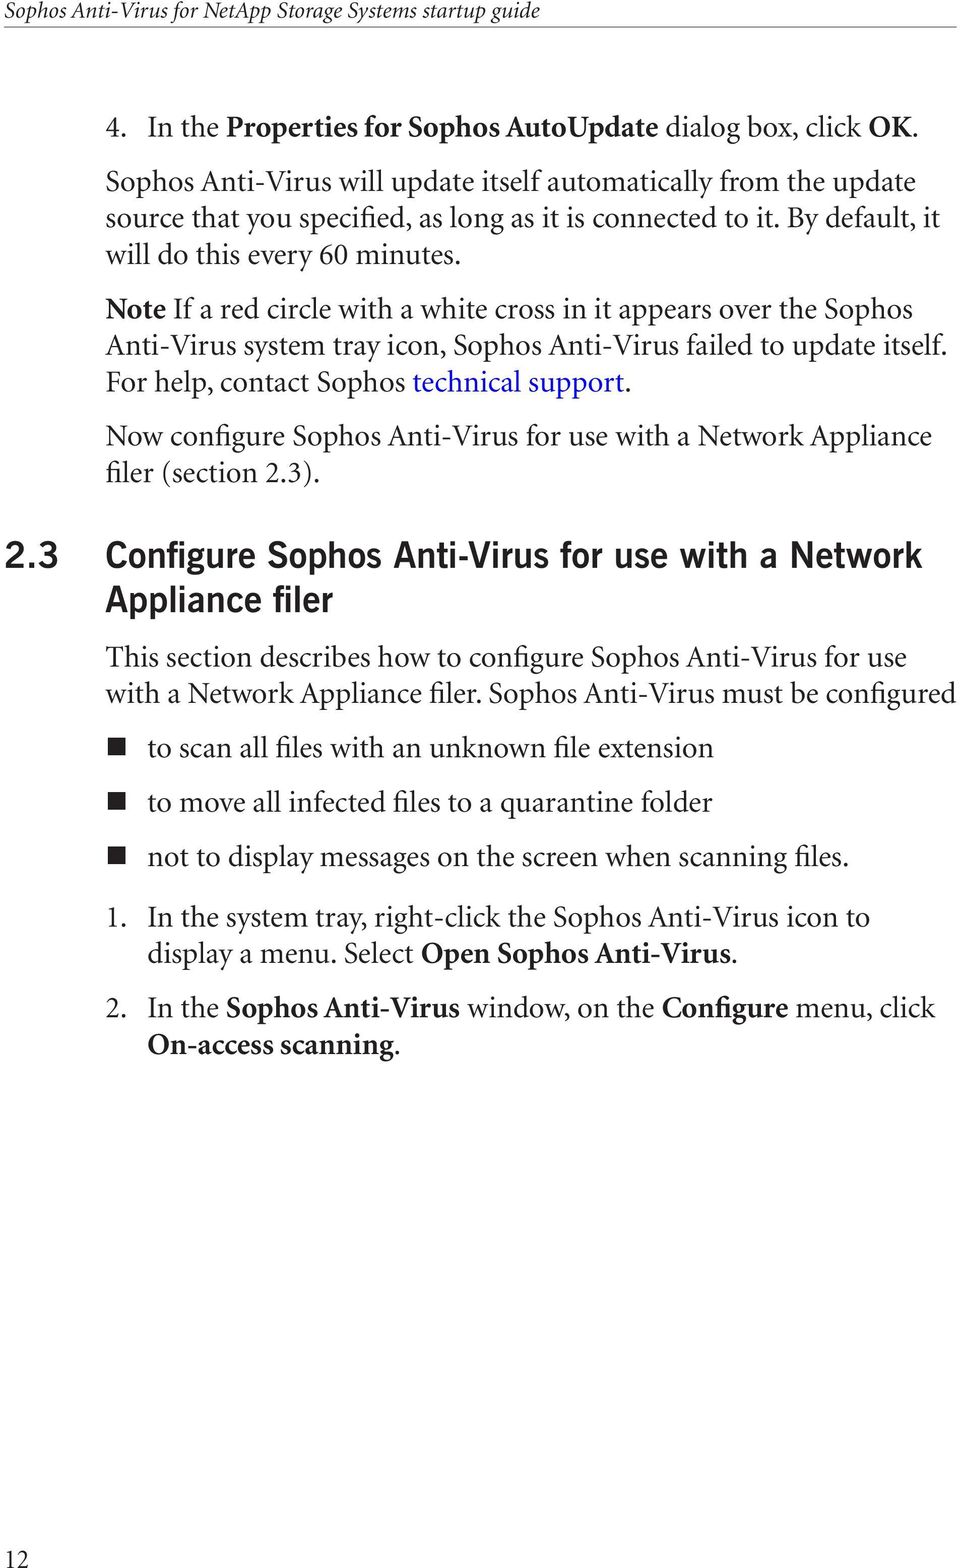 For help, contact Sophos technical support. Now configure Sophos Anti Virus for use with a Network Appliance filer (section 2.